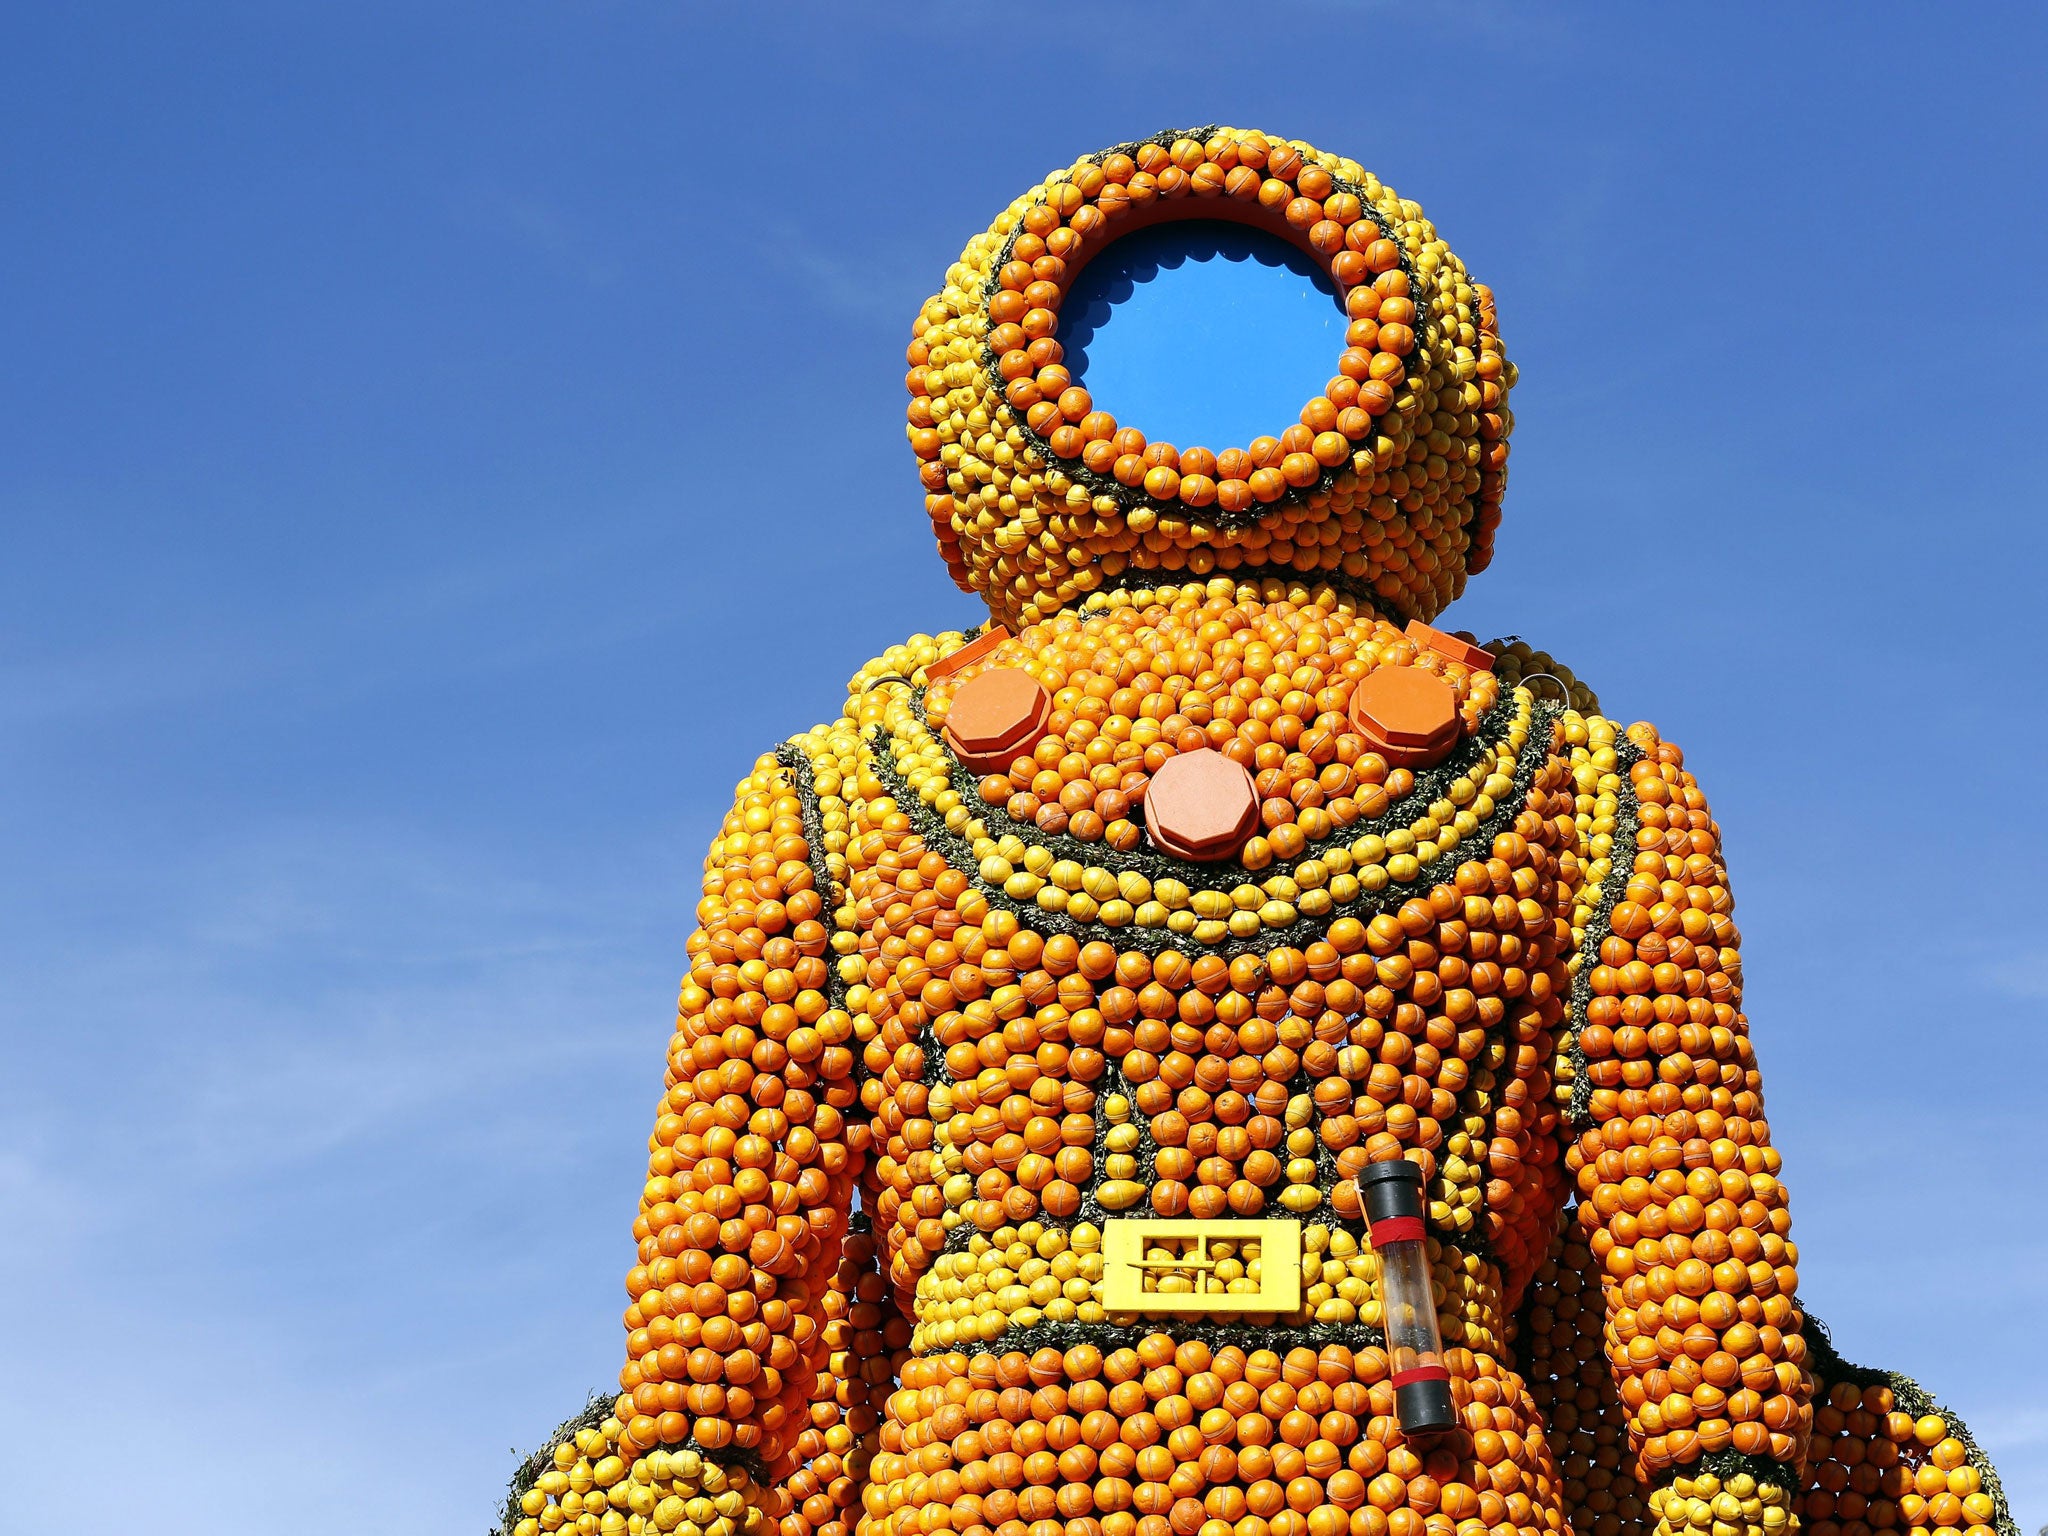 A view at the sculpture 'Le Scaphandrier' made with lemons and oranges ahead of the 81st Lemon Festival in Menton